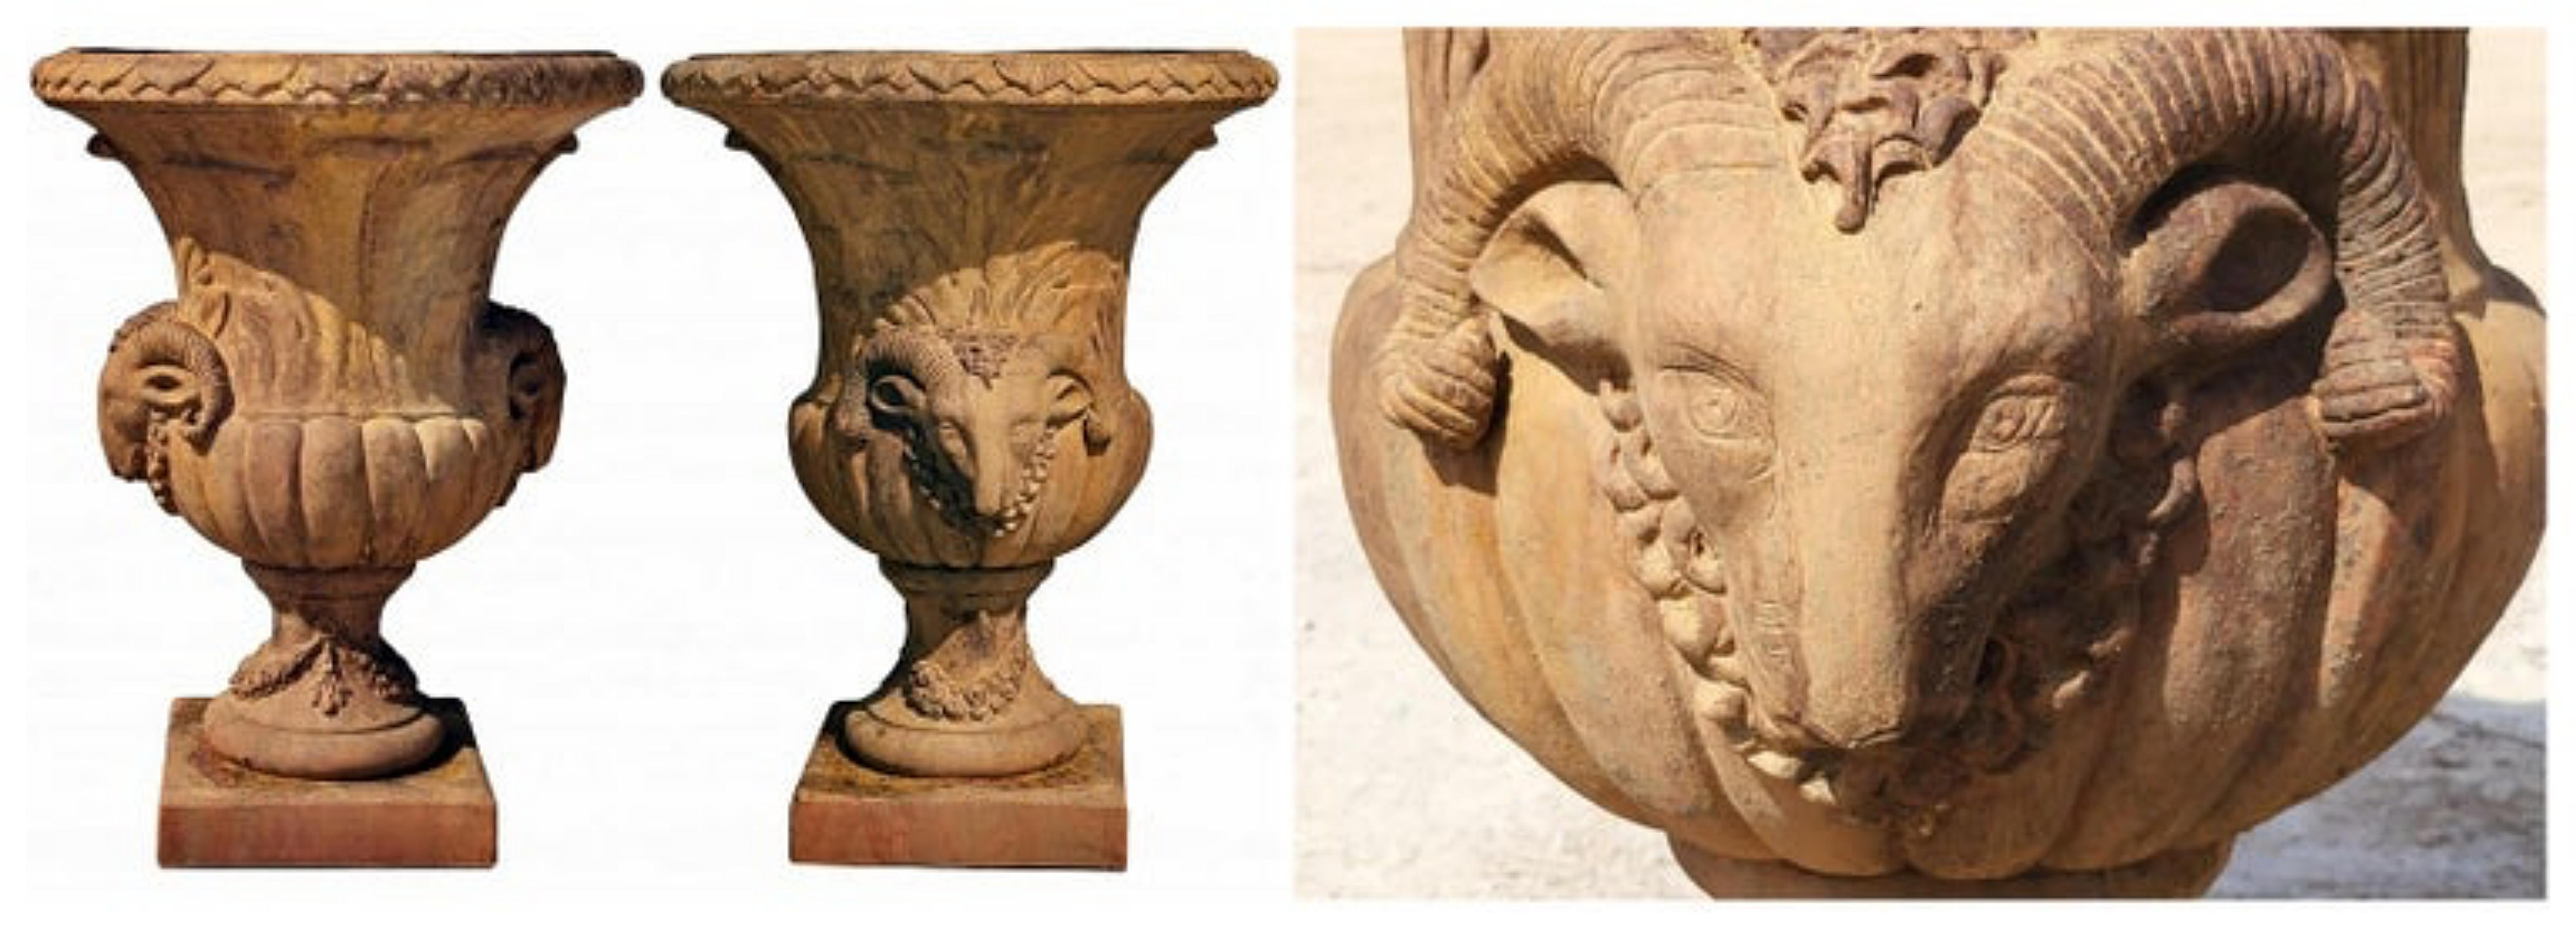 Pair Of Renaissance Florentine vases with aries heads.
Early 20th century


Copy of a Florentine Renaissance vase with two large Aries heads and four huge Achantus leaves. 
Square base with small festoons.
Handmade.

Measures: height 90